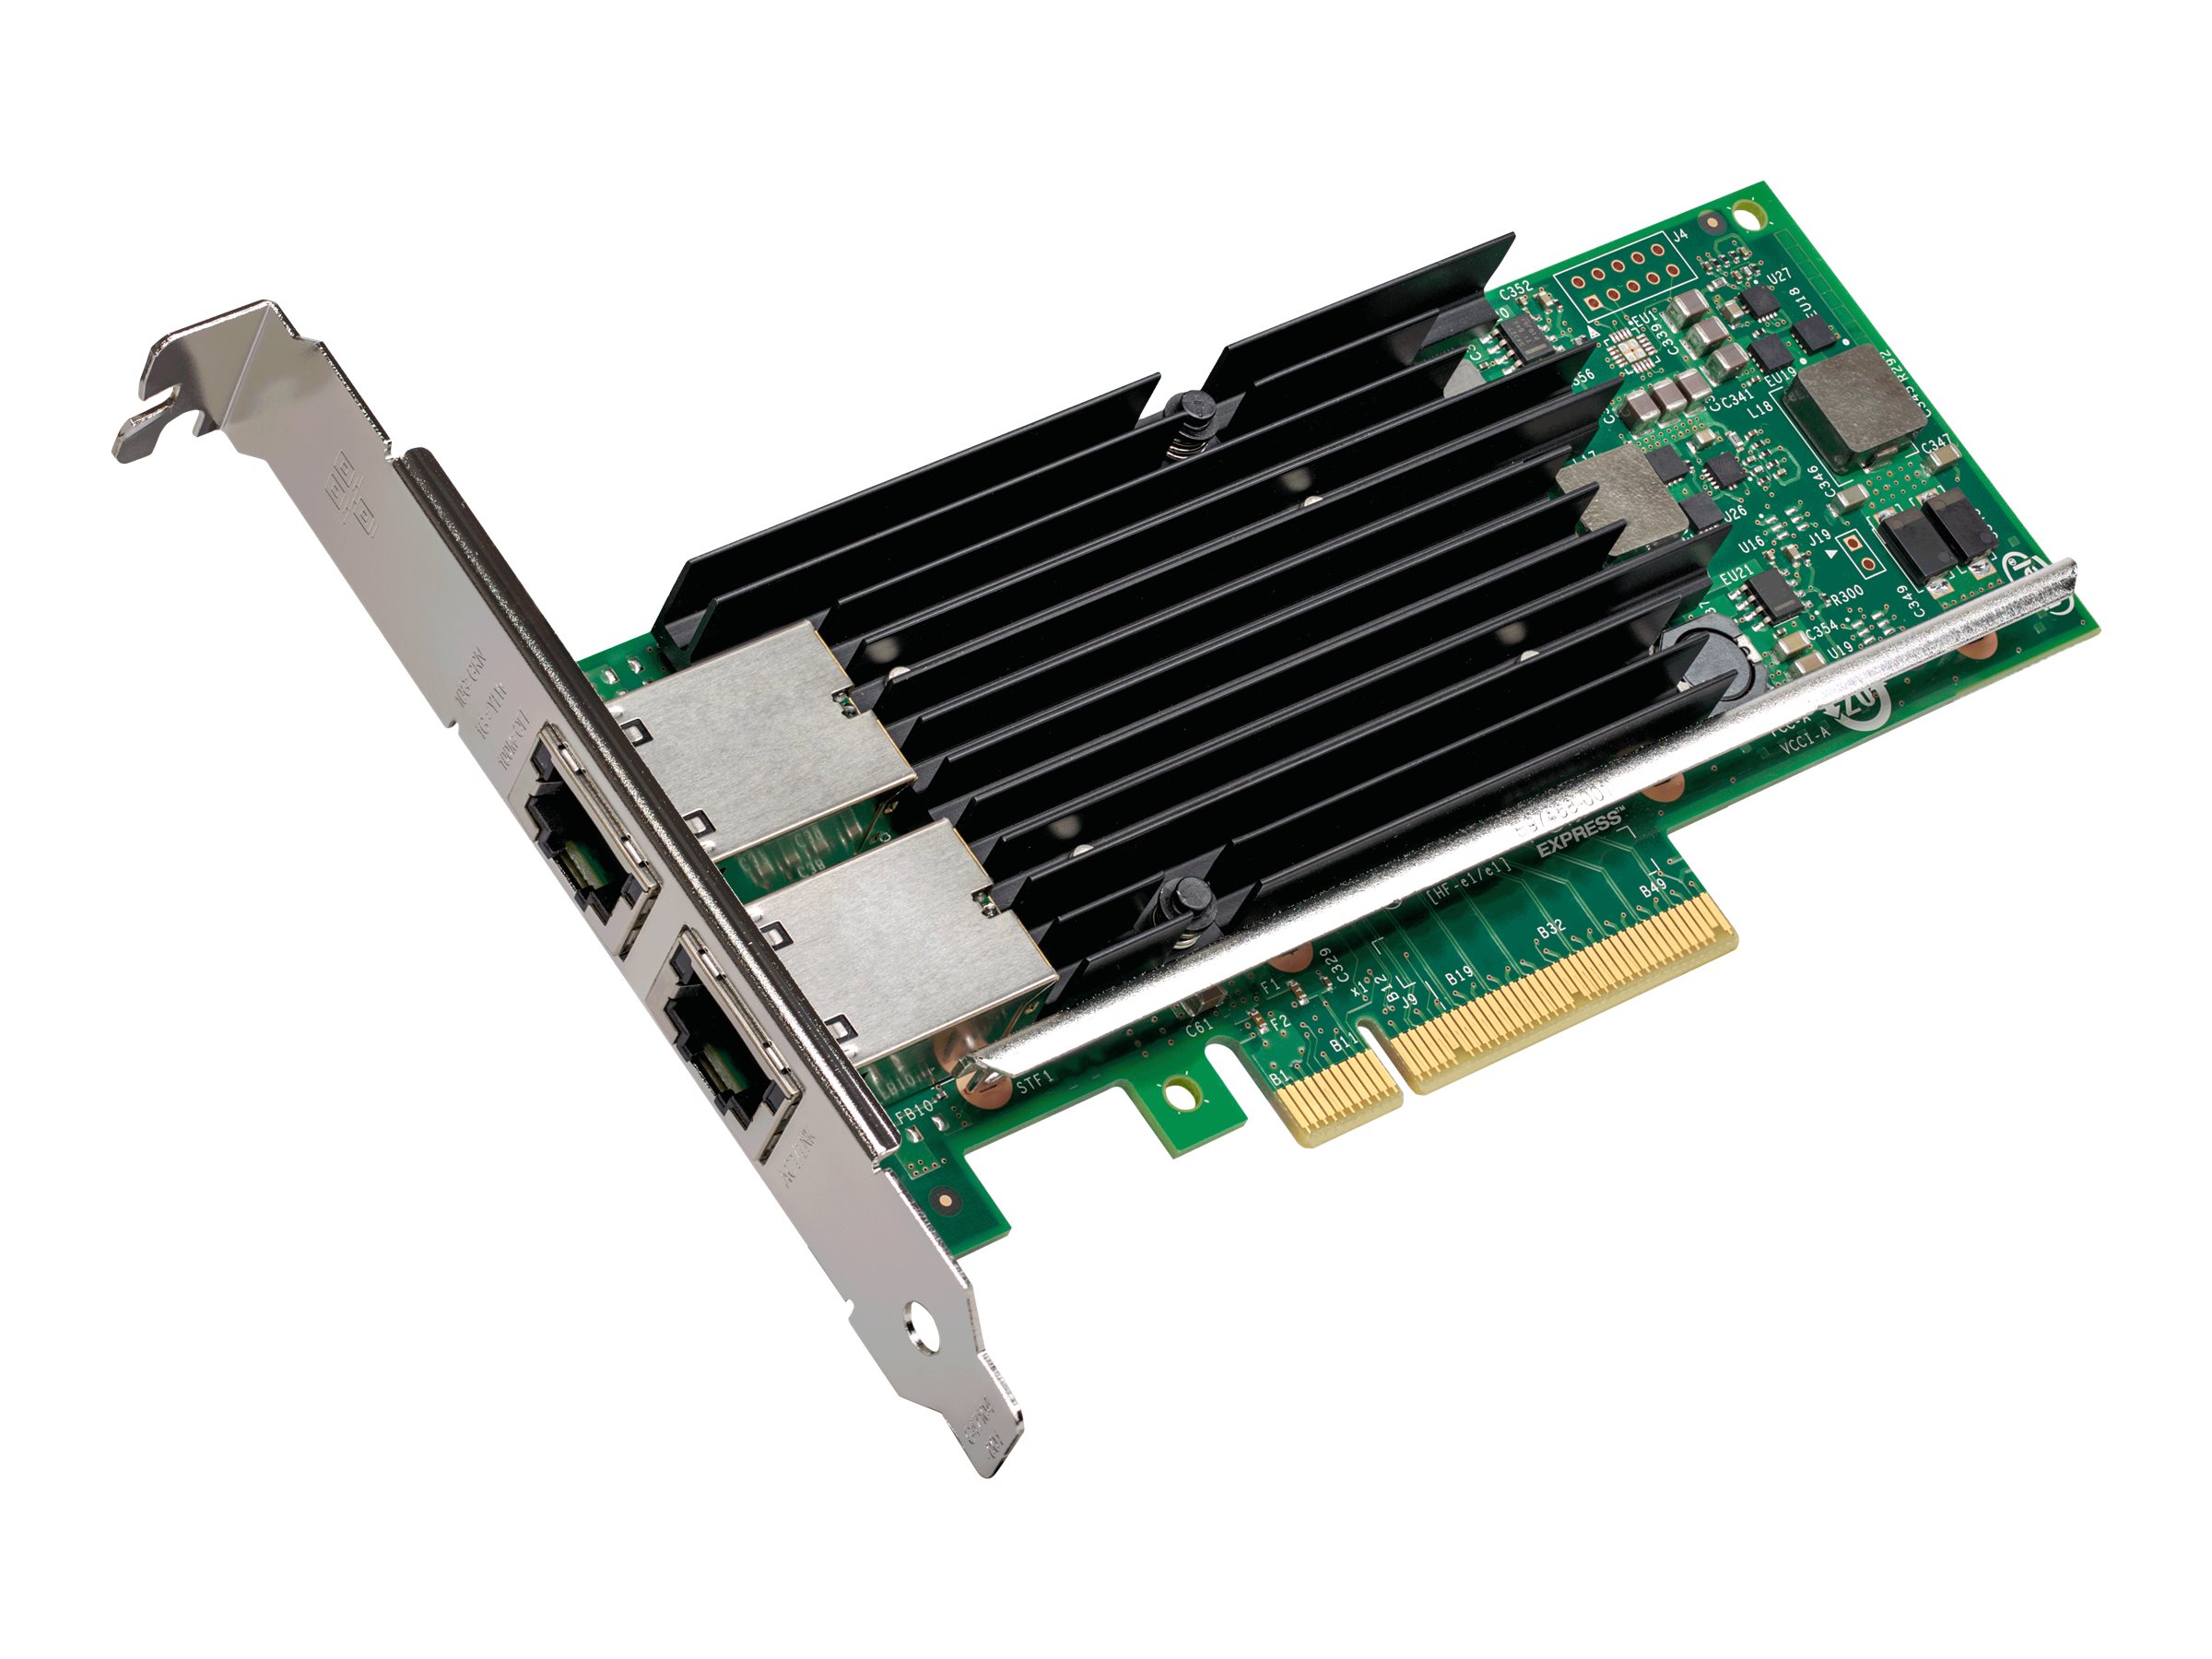 Intel Ethernet Converged Network Adapter X540-T2 Netværksadapter PCI Express 2.1 x8 10Gbps